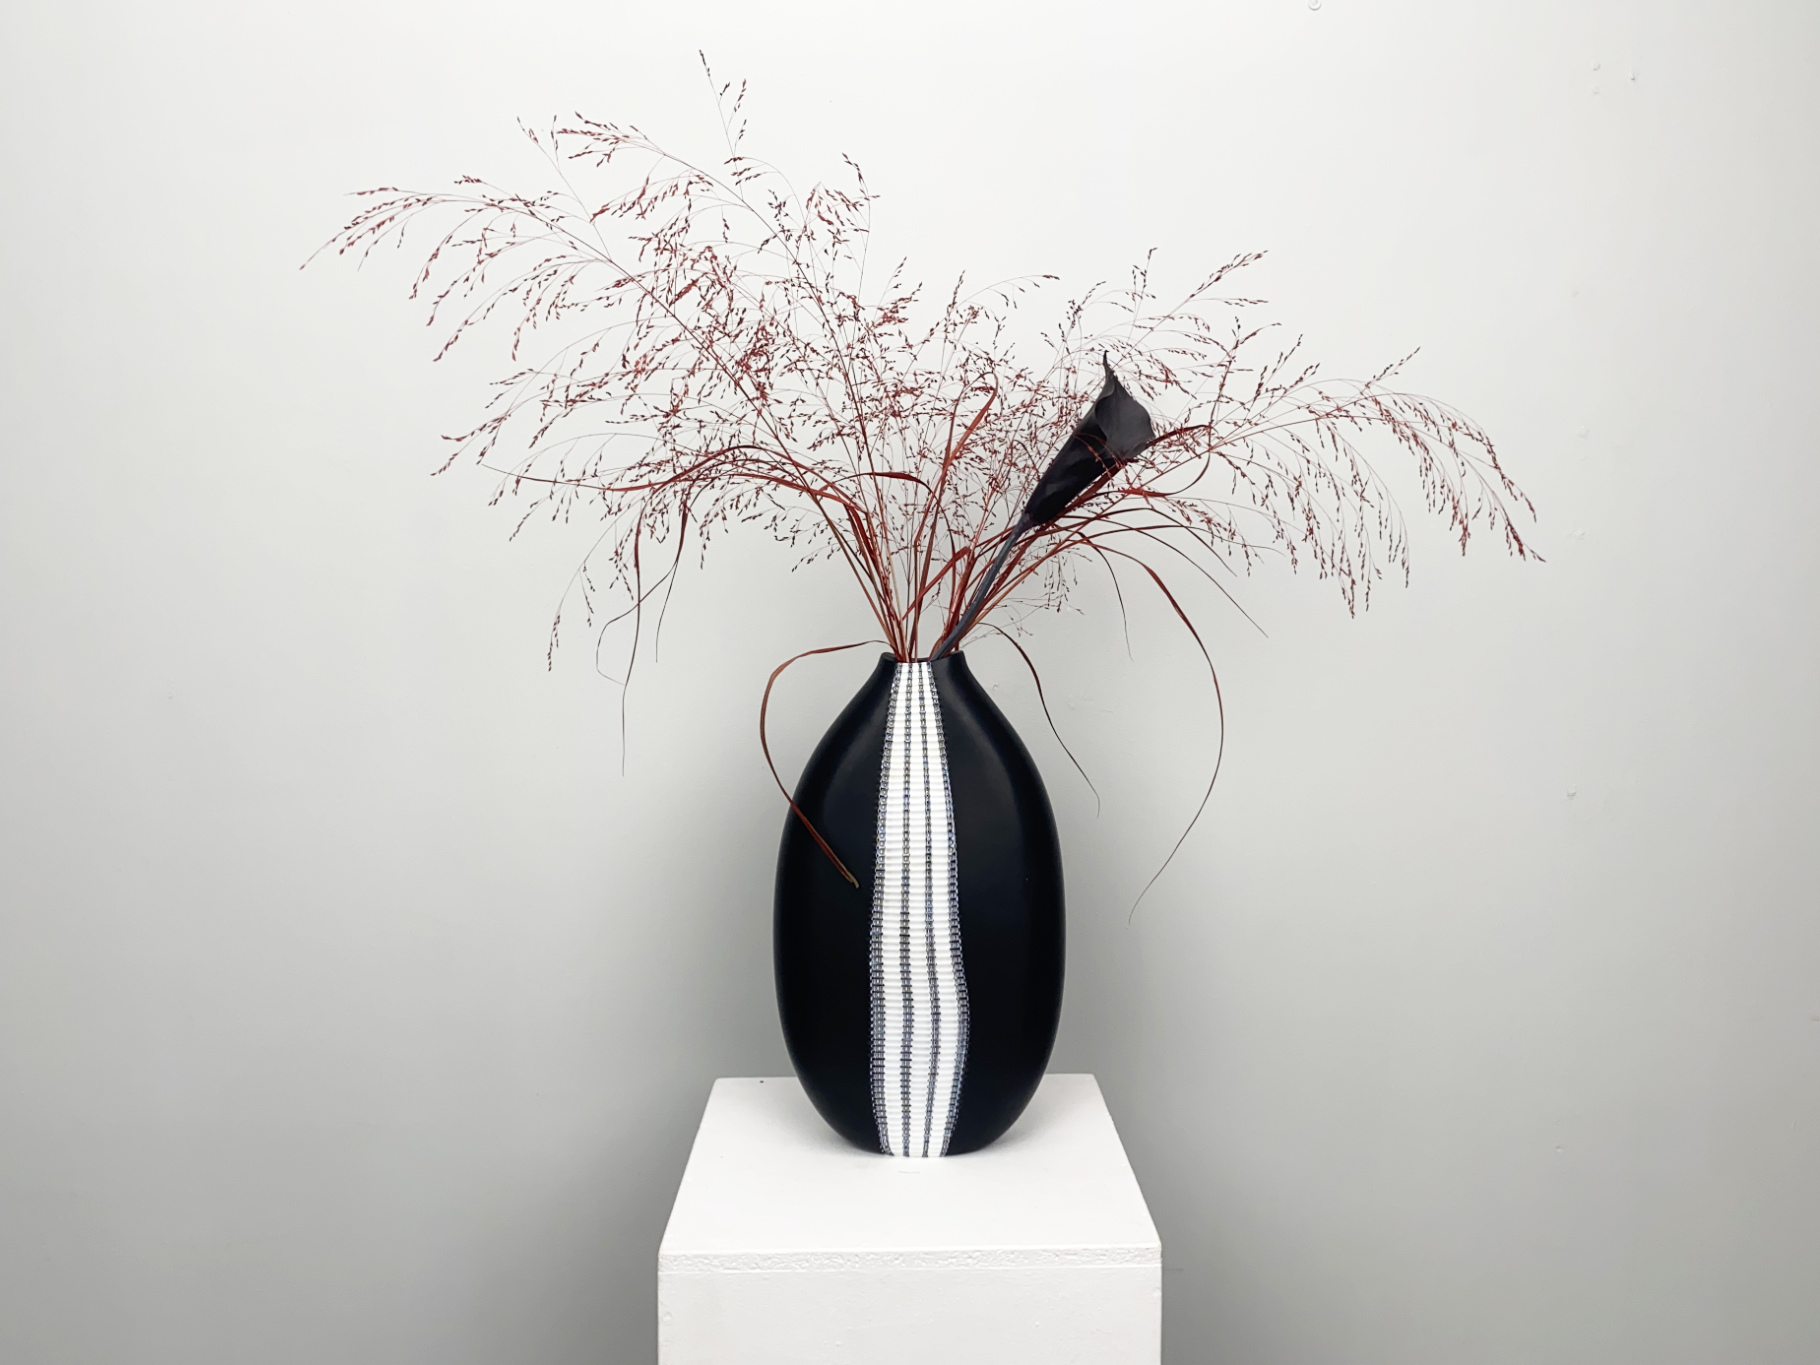 Glass Vase “Vessel“ by Andrea Zilio for Anfora Murano 2007. Black glass, colourlessly overlaid on the inside, with a wide, fused vertical band with rows of black and white patterned murrines, alternating with white vertical stripes